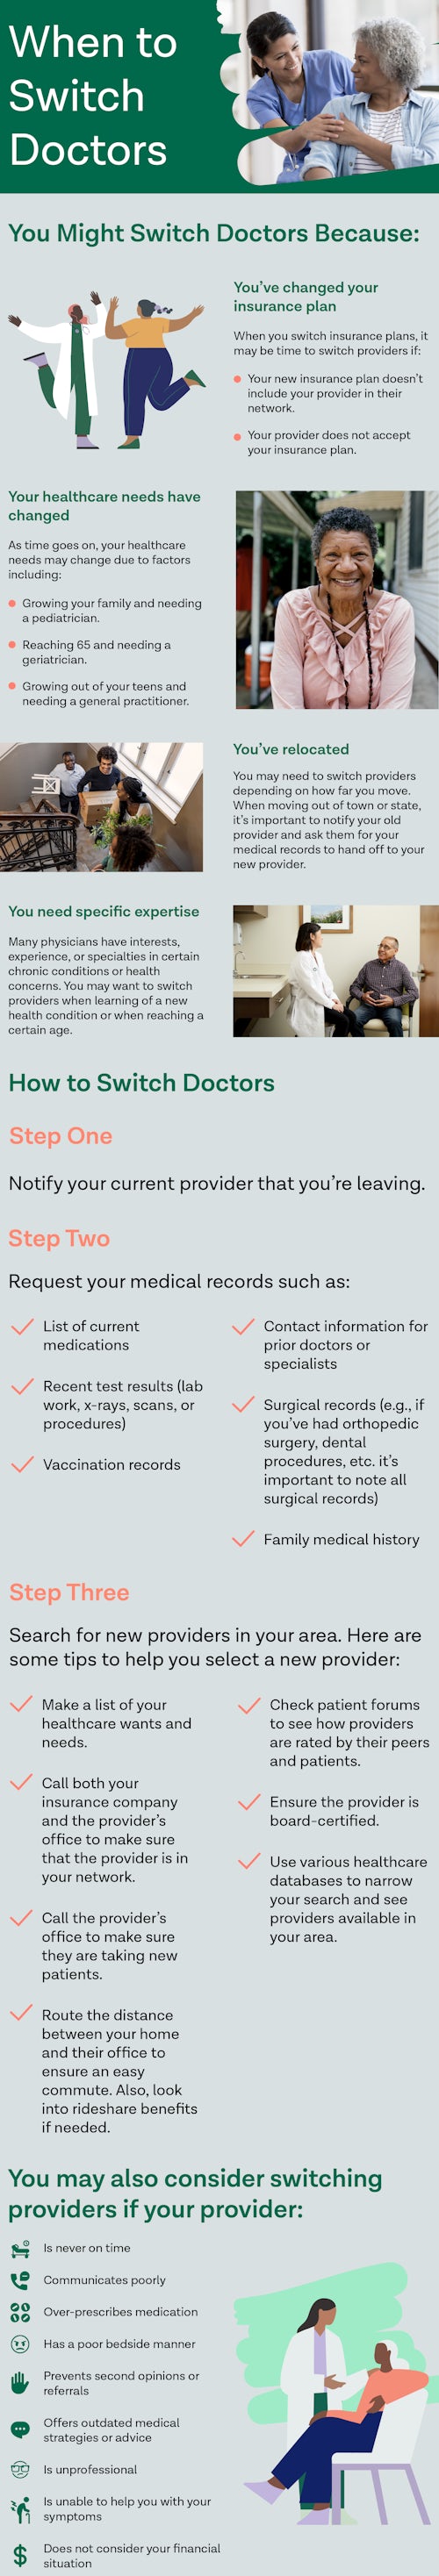 breakdown of various reasons why someone might switch doctors